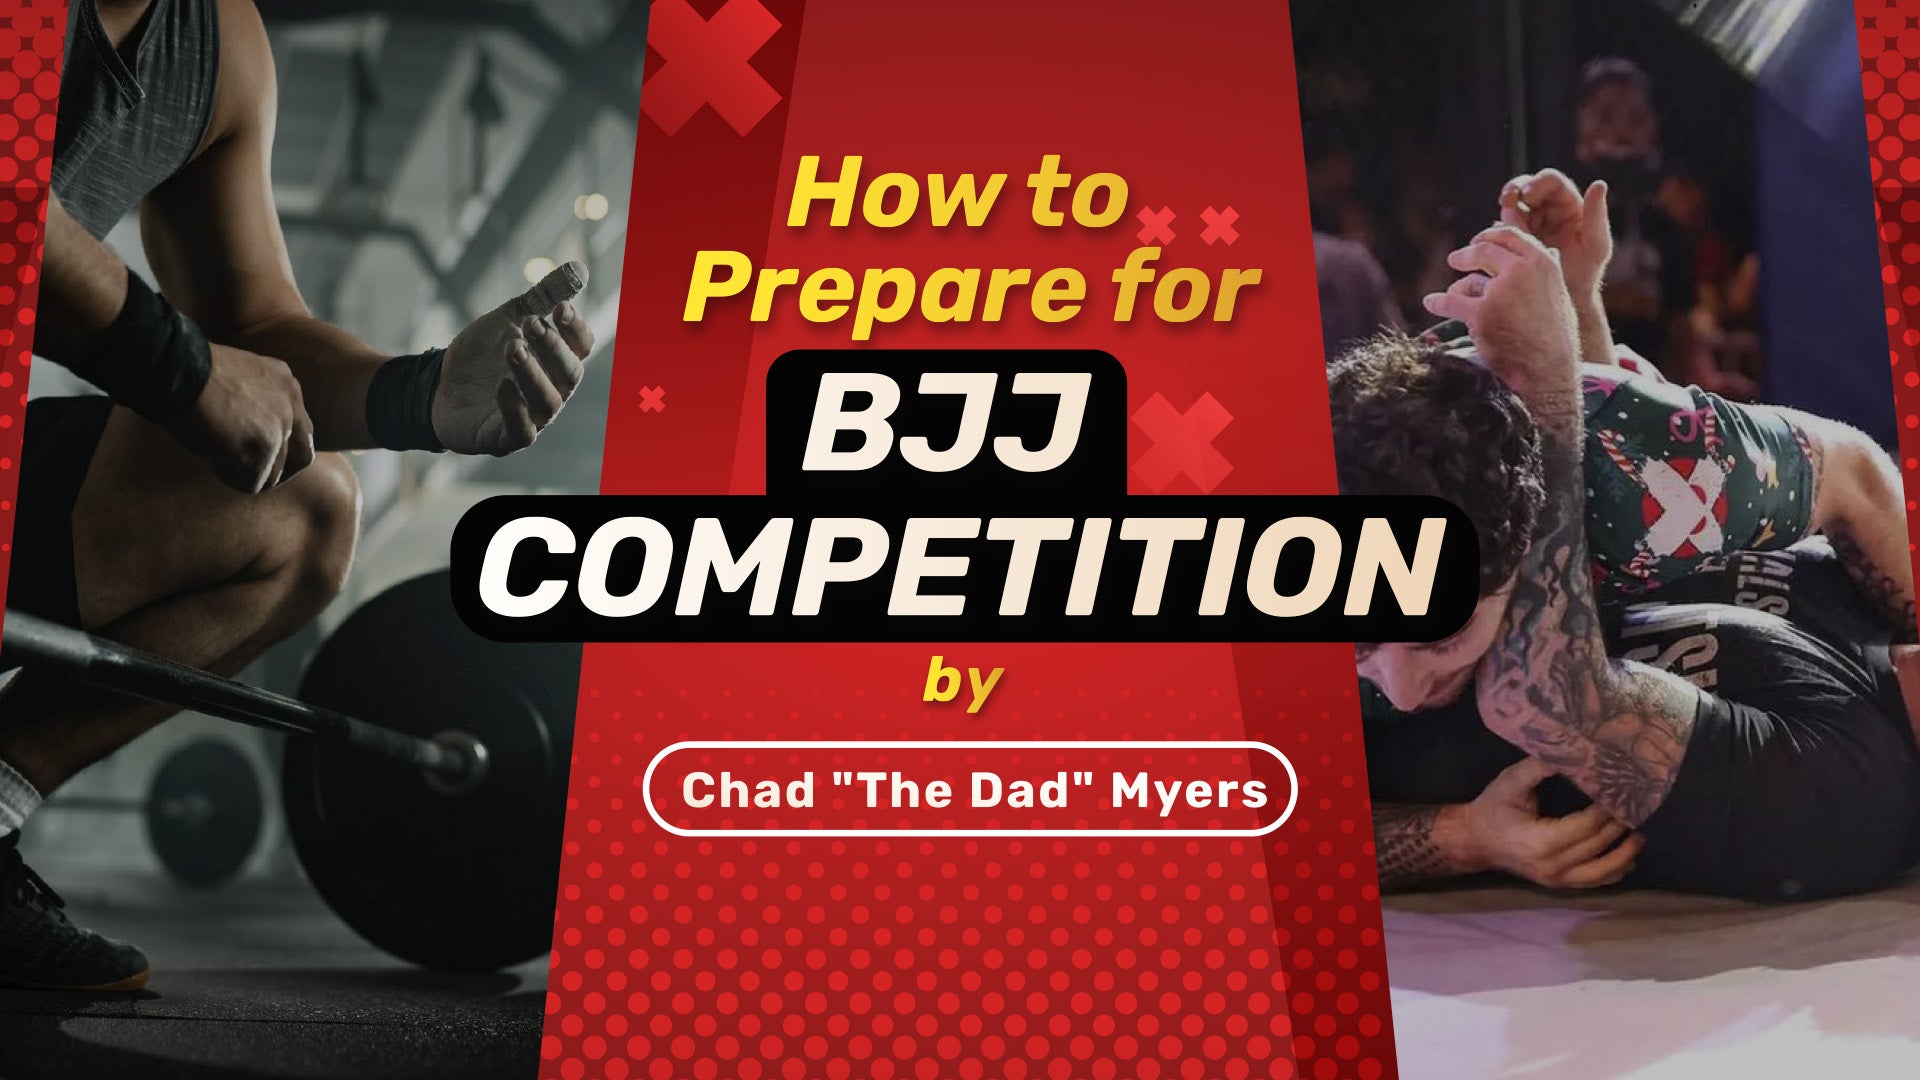 How to Prepare for BJJ Competition by Chad "The Dad" Myers